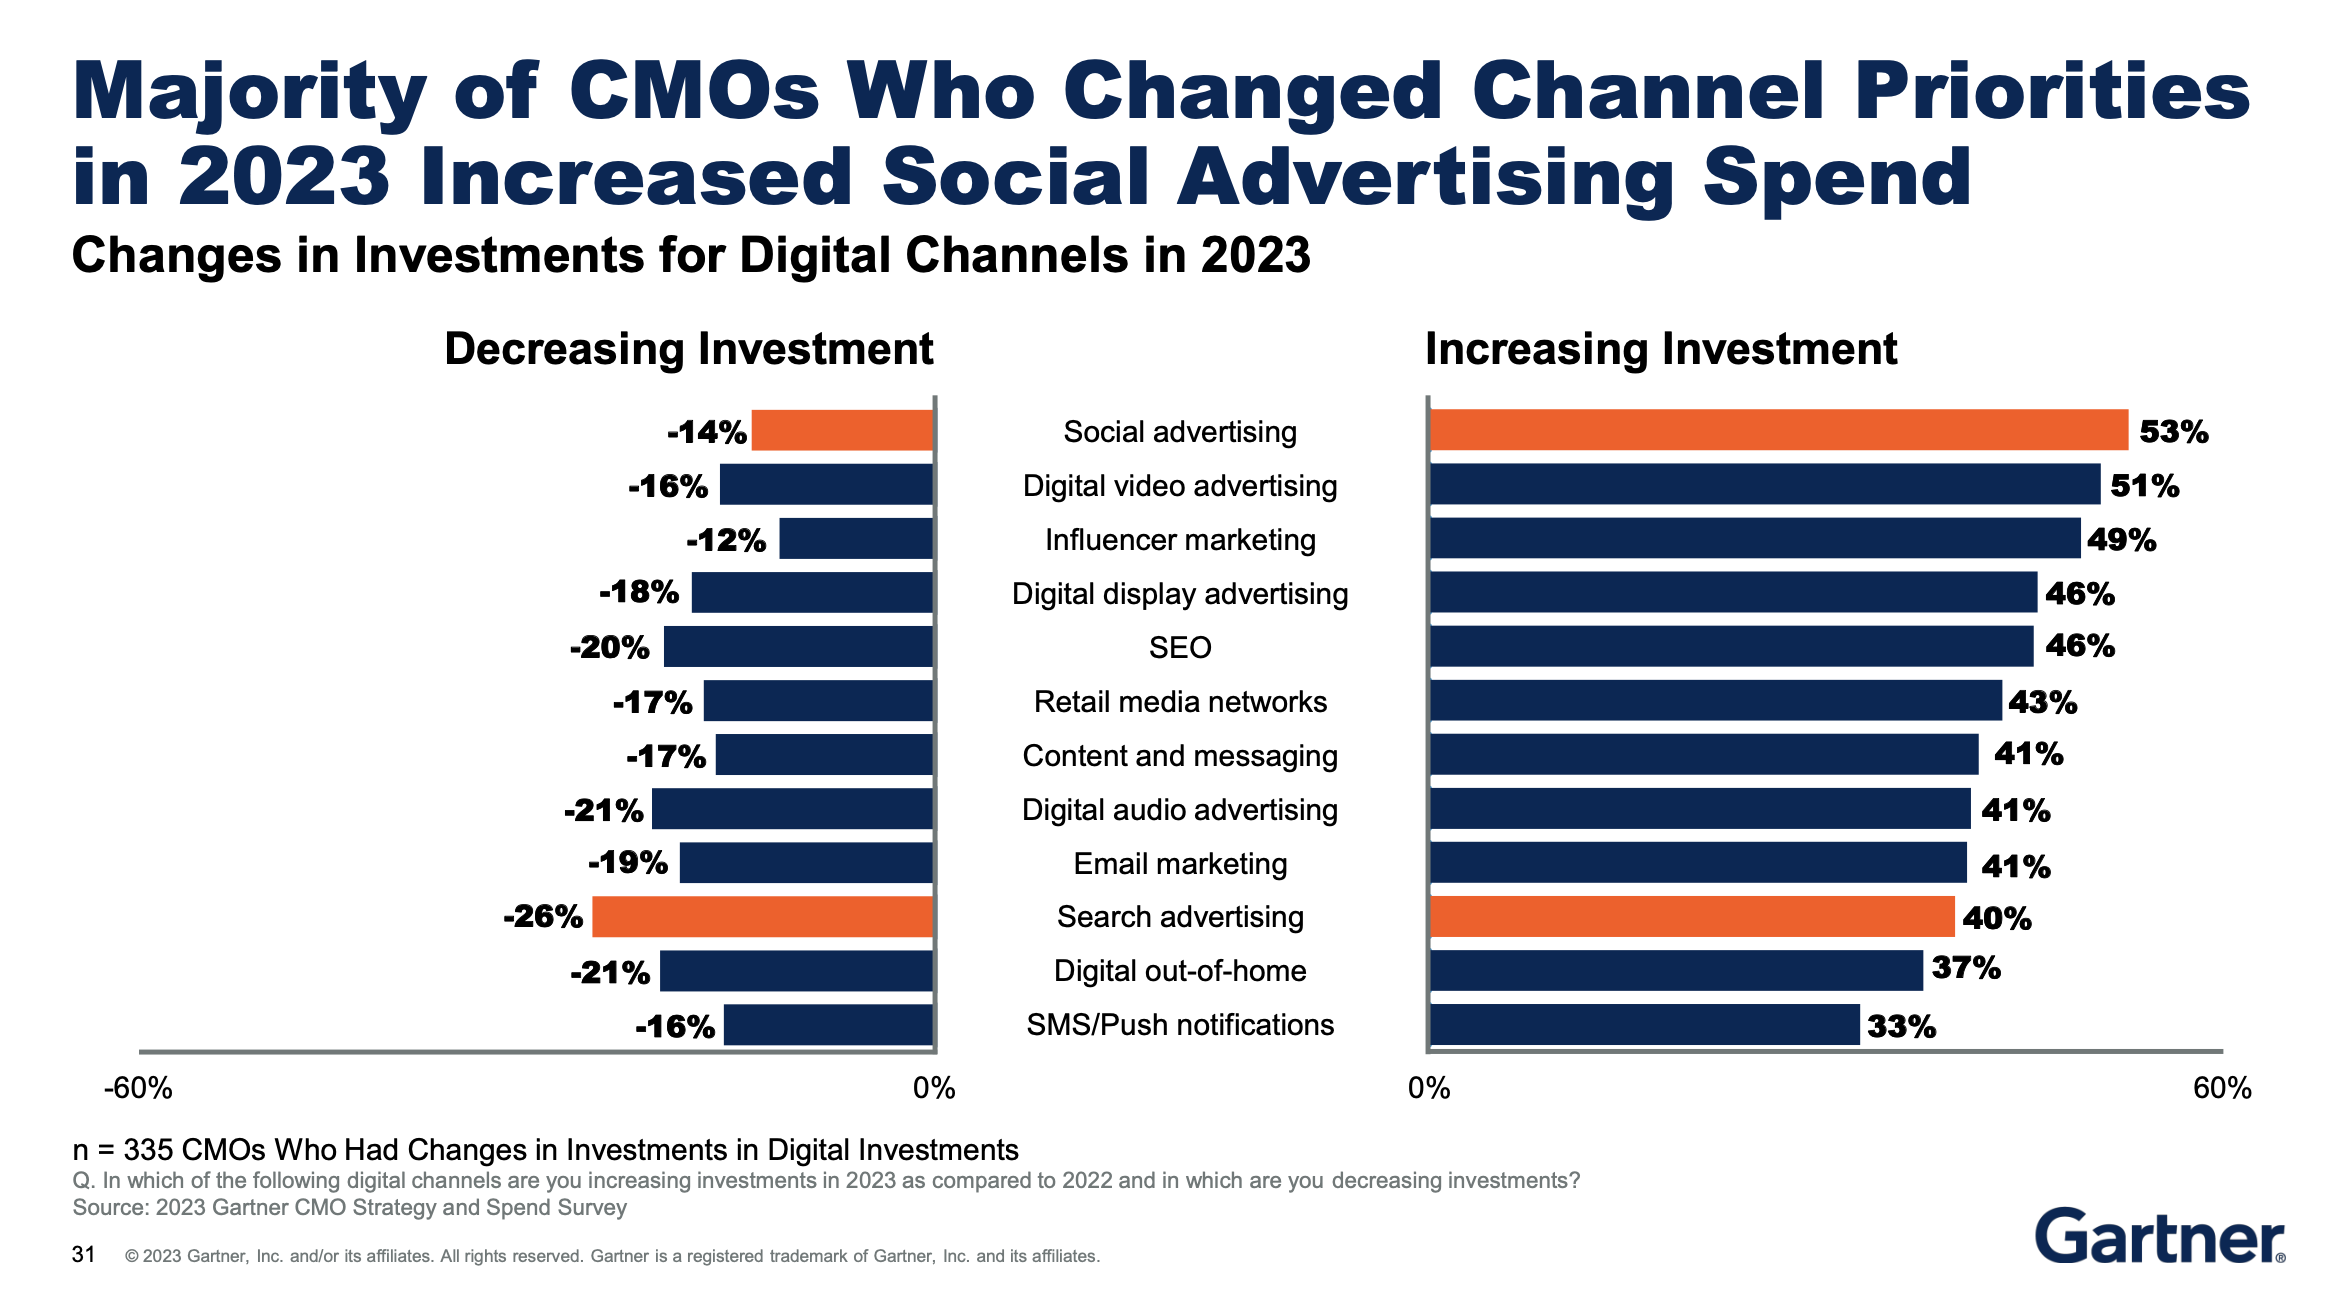 A screenshot from the 2023 Gartner CMO Strategy and Spend Survey report. It is a bar chart depicting changes in investments in digital channels in 2023.